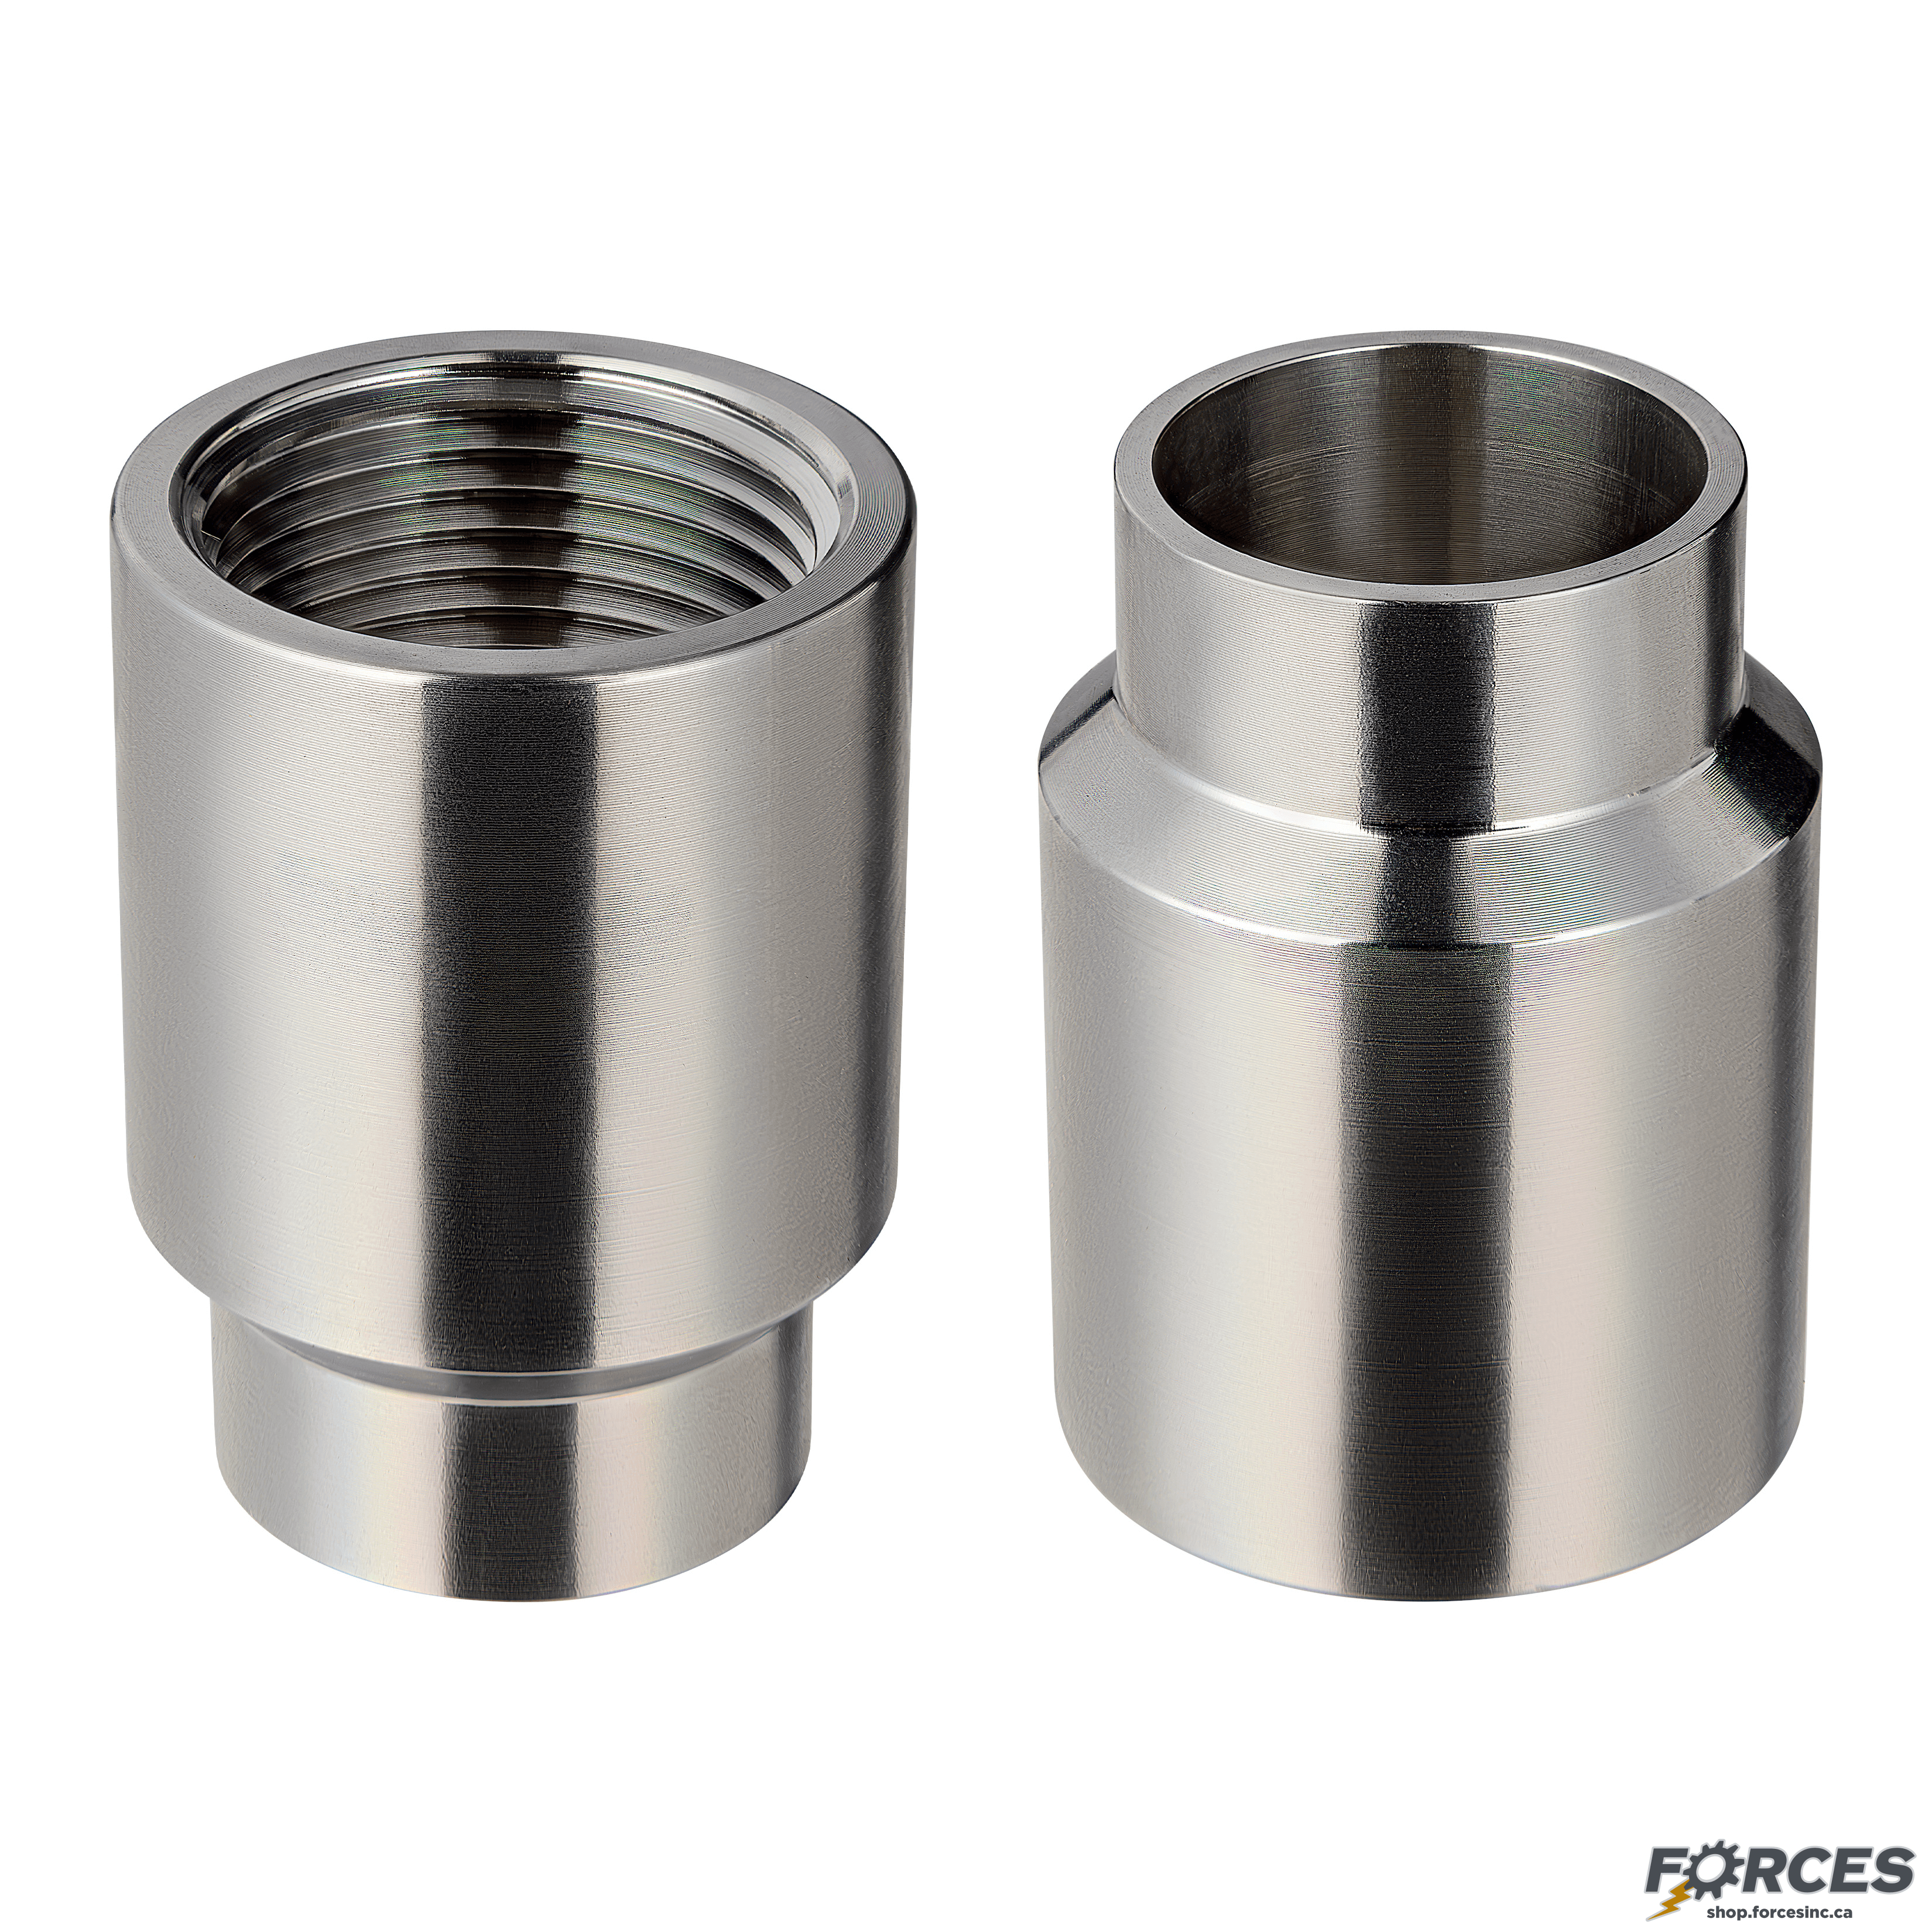 1-1/2" x 1" Butt Weld x Female NPT Adapter - Stainless Steel 316 - Forces Inc